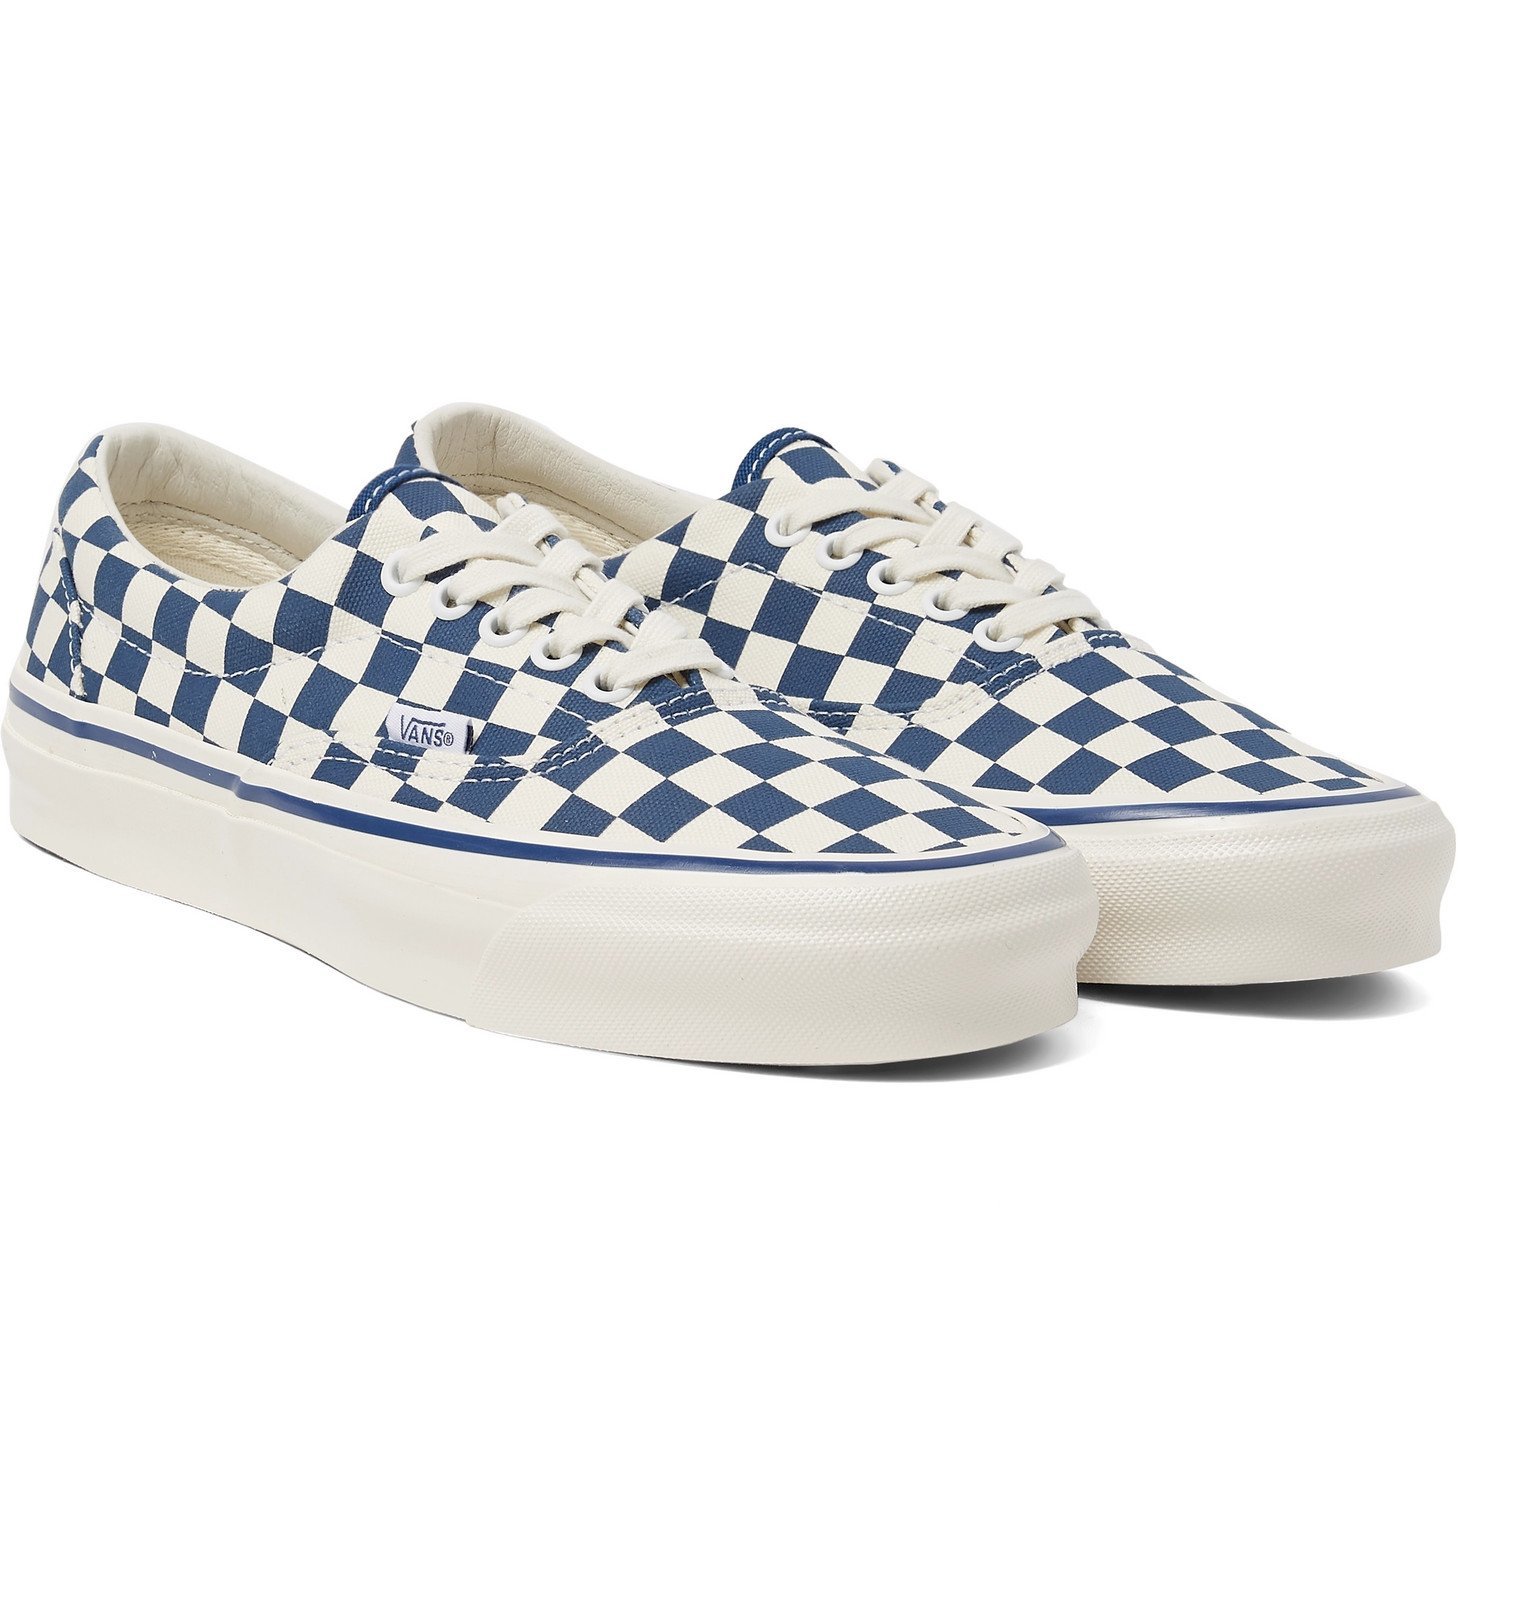 OG Era LX Checkerboard Canvas Sneakers 